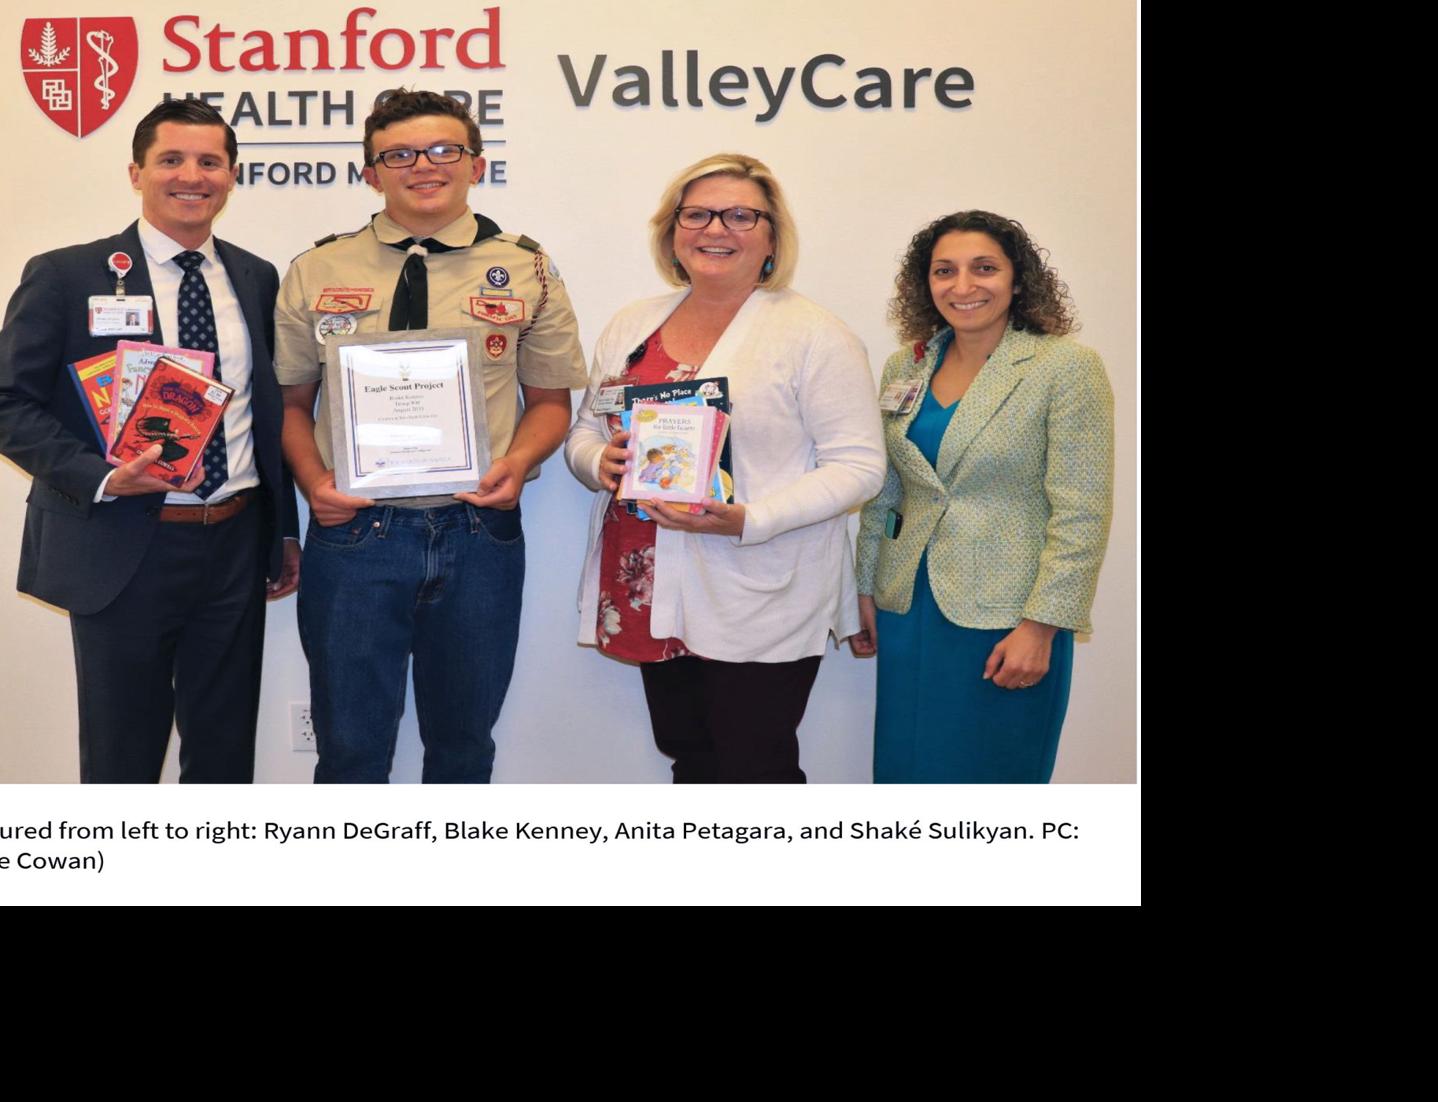 First responders benefiting from Shelton teen's Eagle Scout project